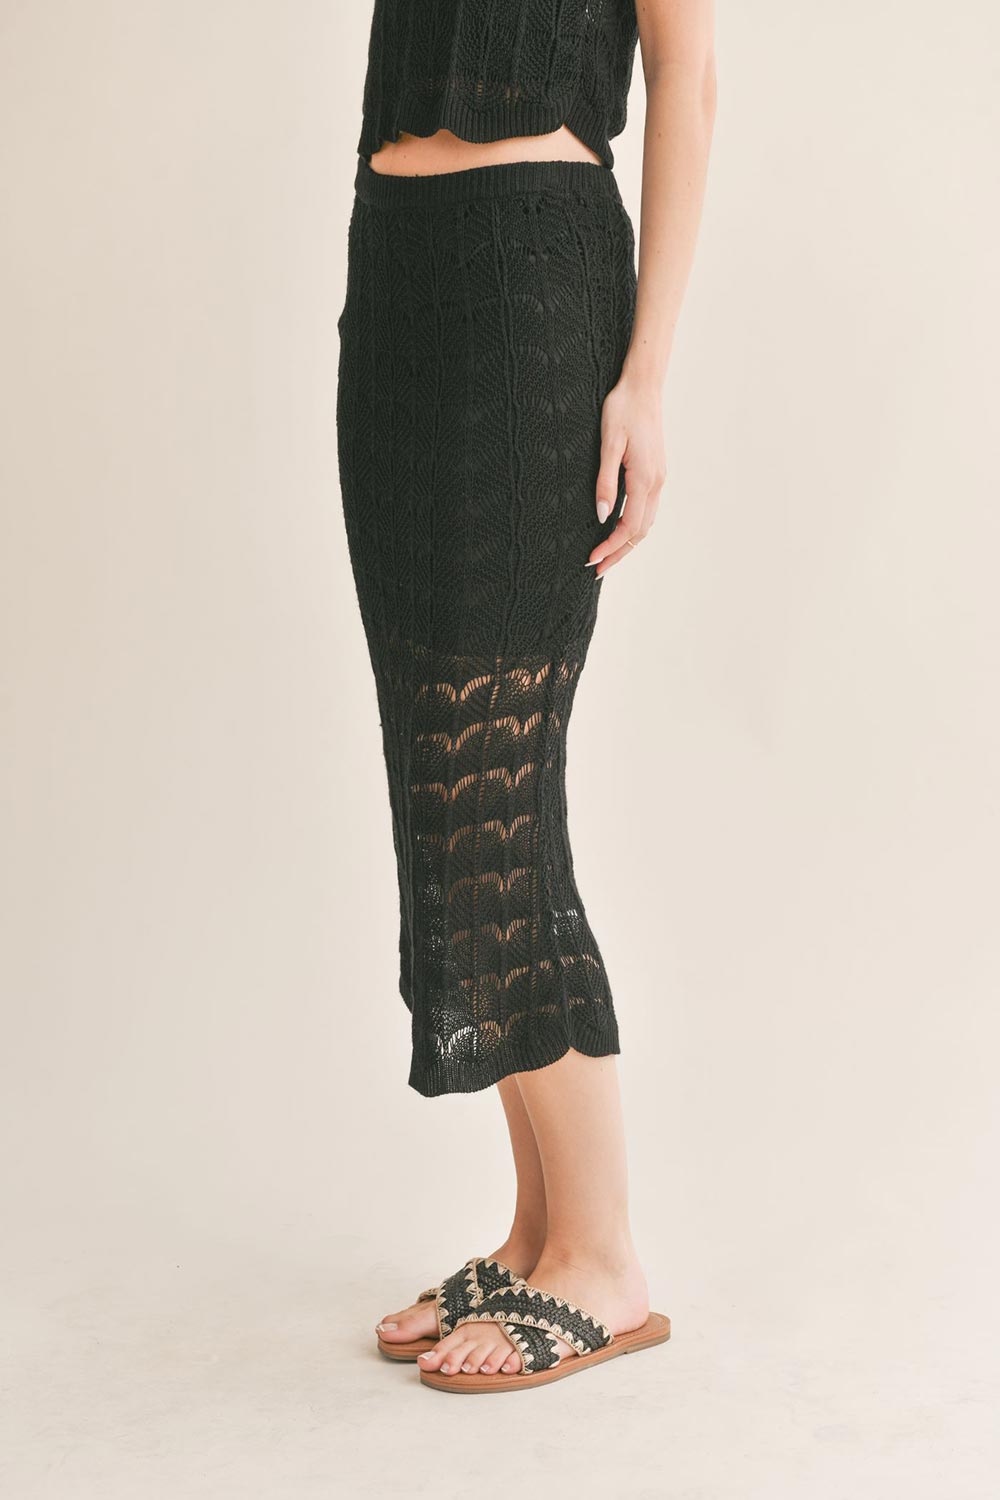 Sage the Label - Cappuccino Open Knit Midi Skirt - Black - Side